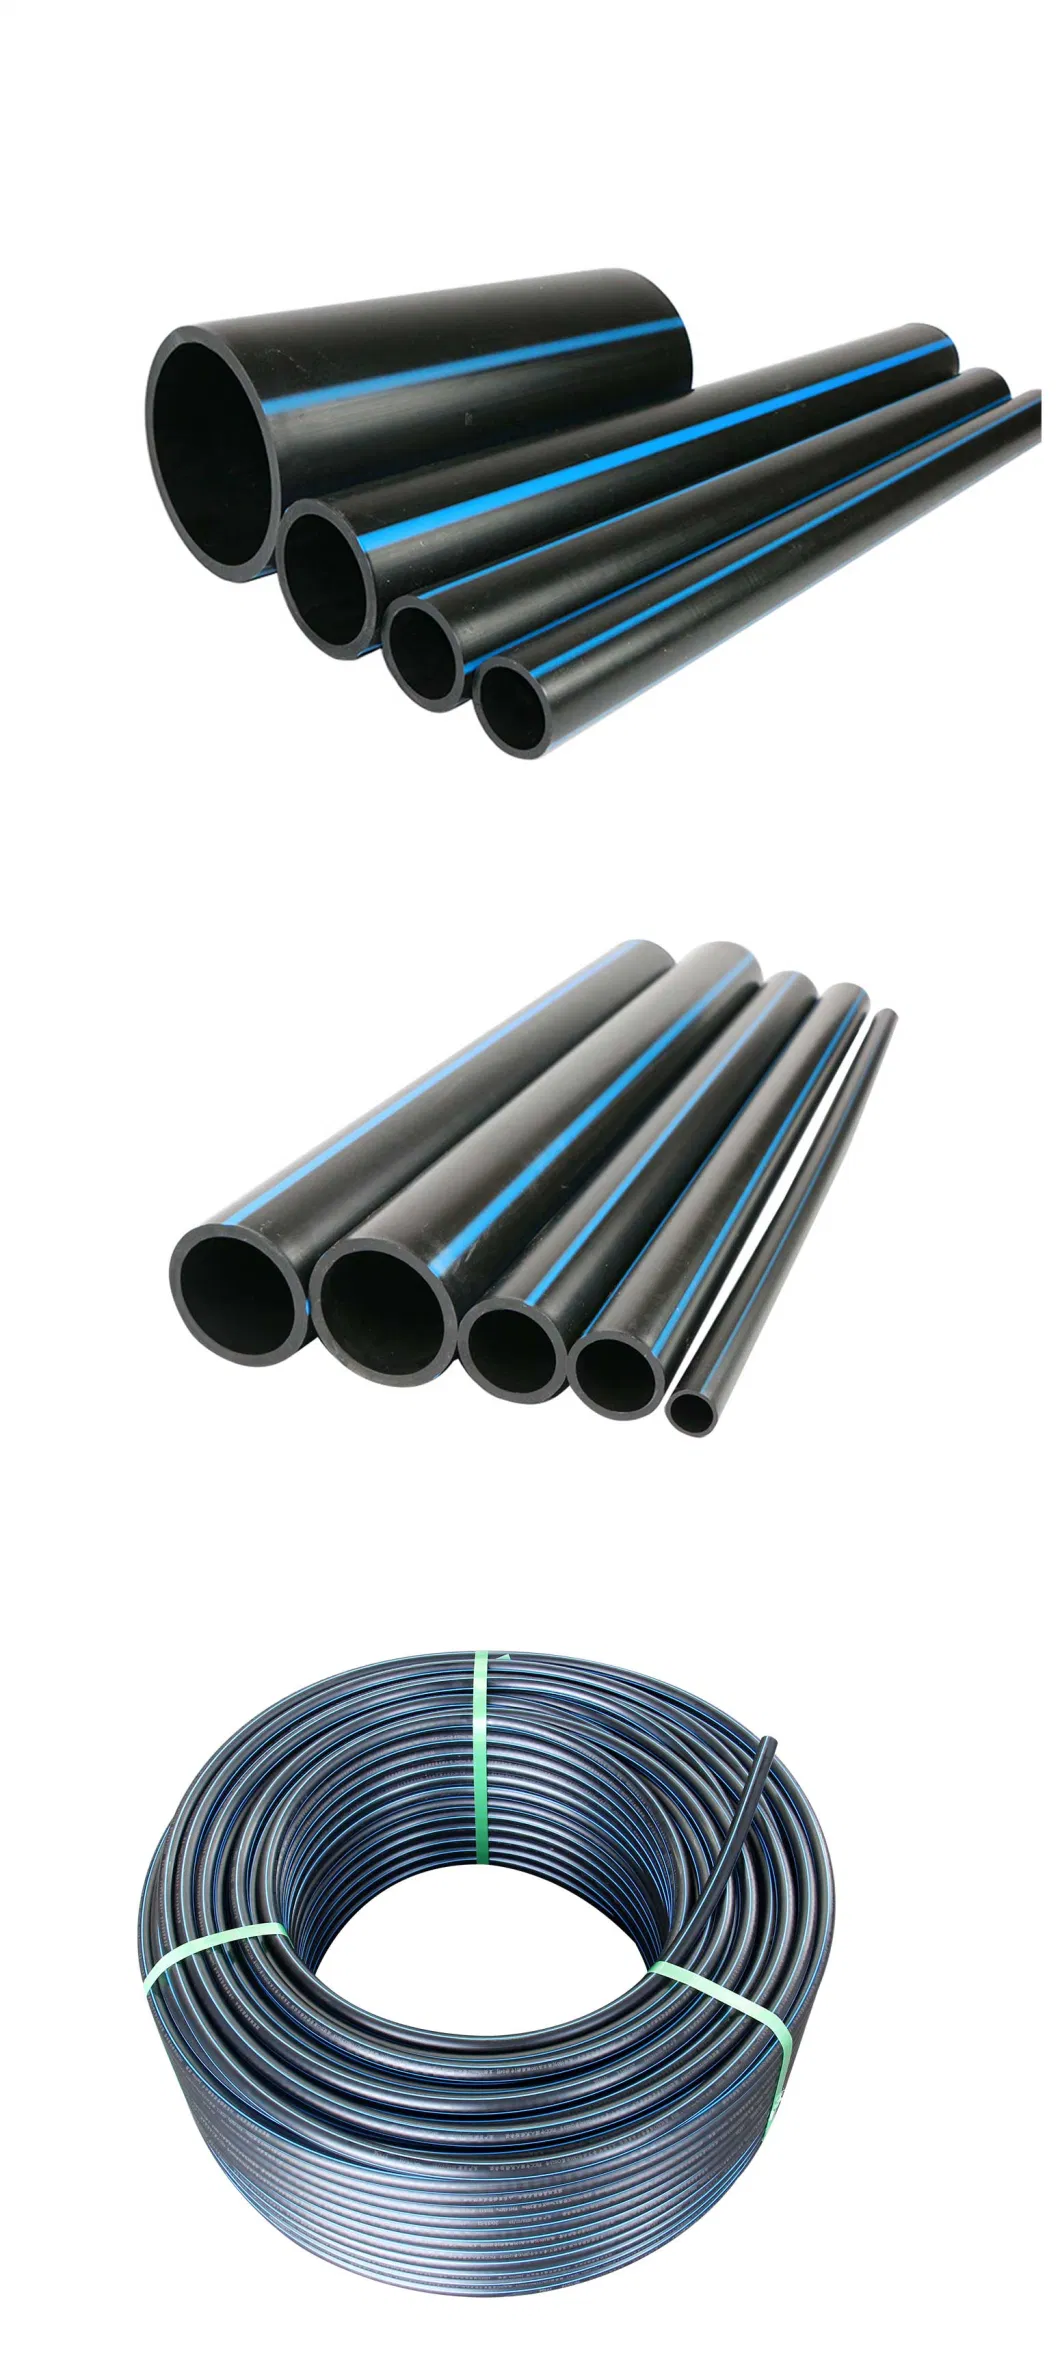 SDR21, SDR 17, SDR11, SDR9 HDPE/PE Pipe Plastic Water Pipe for Water Supply